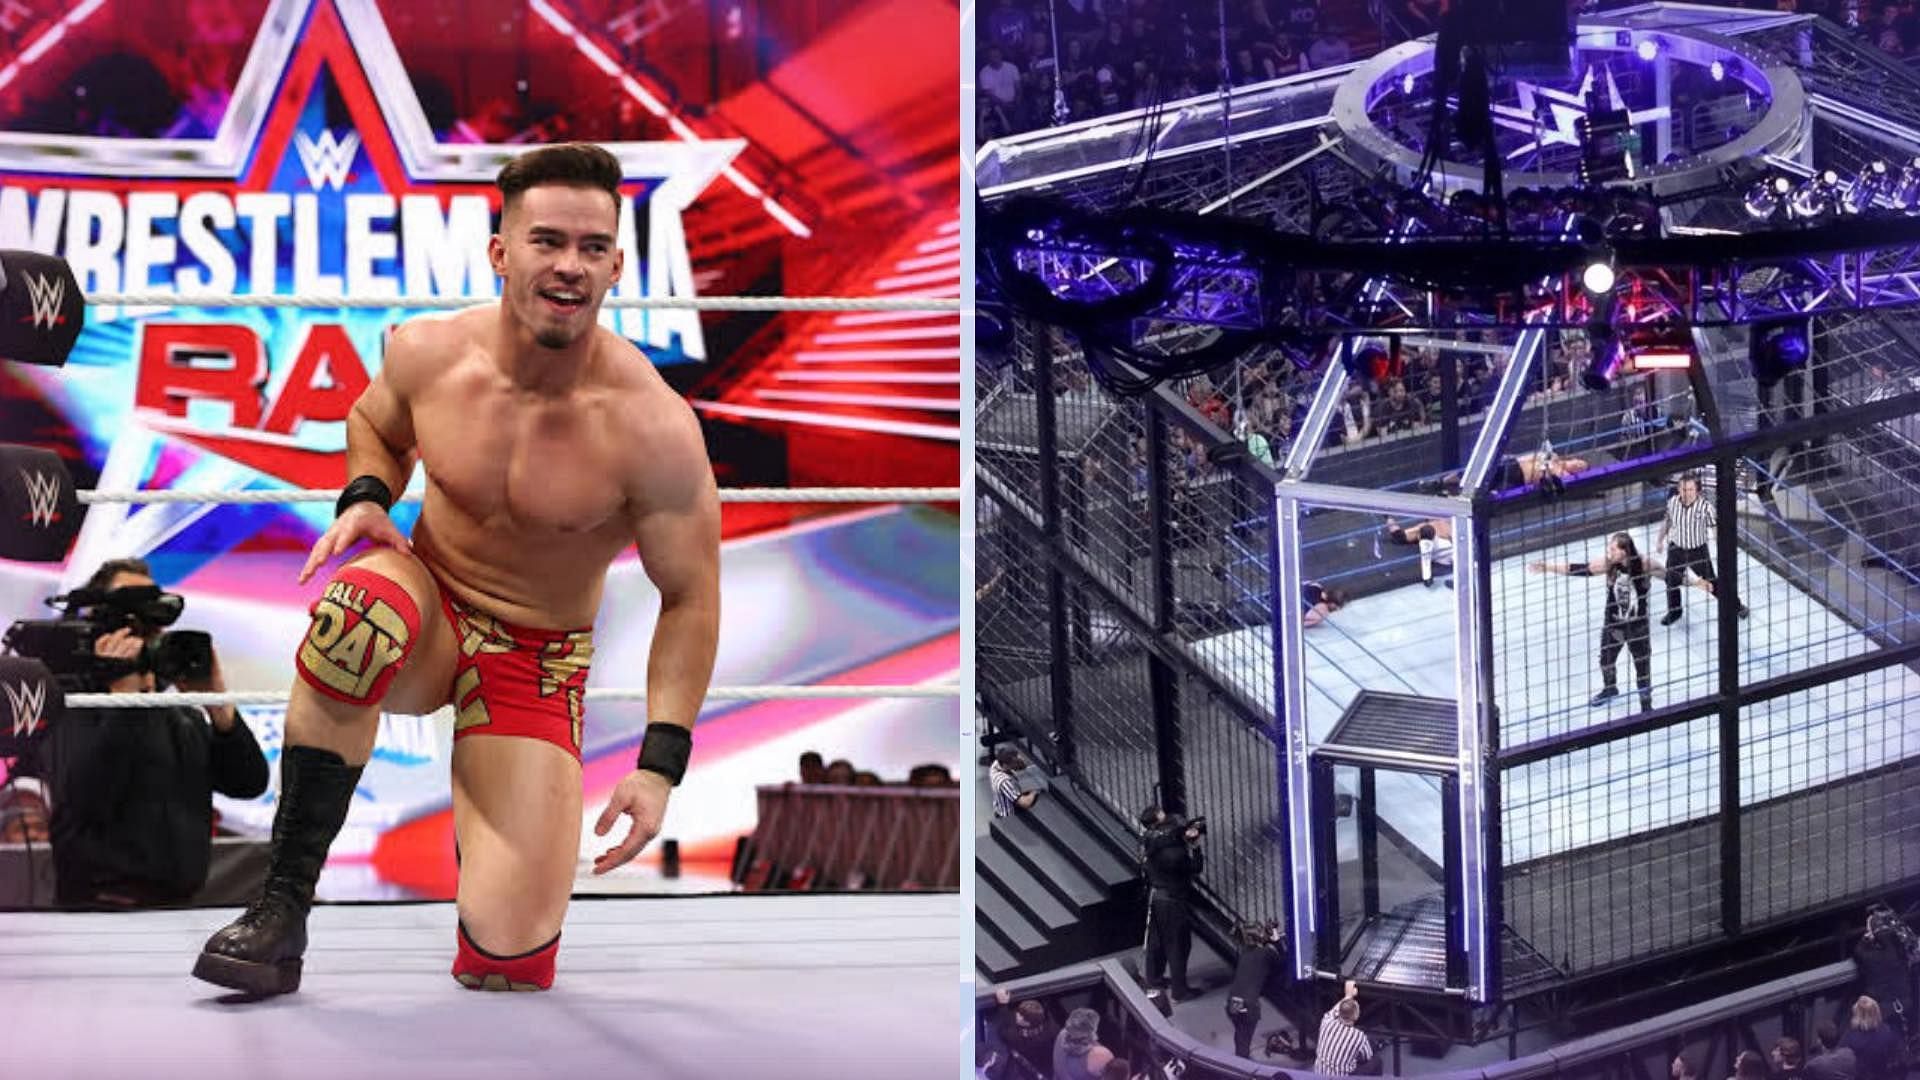 Austin Theory is set to defend his United States Championship at the WWE Elimination Chamber event